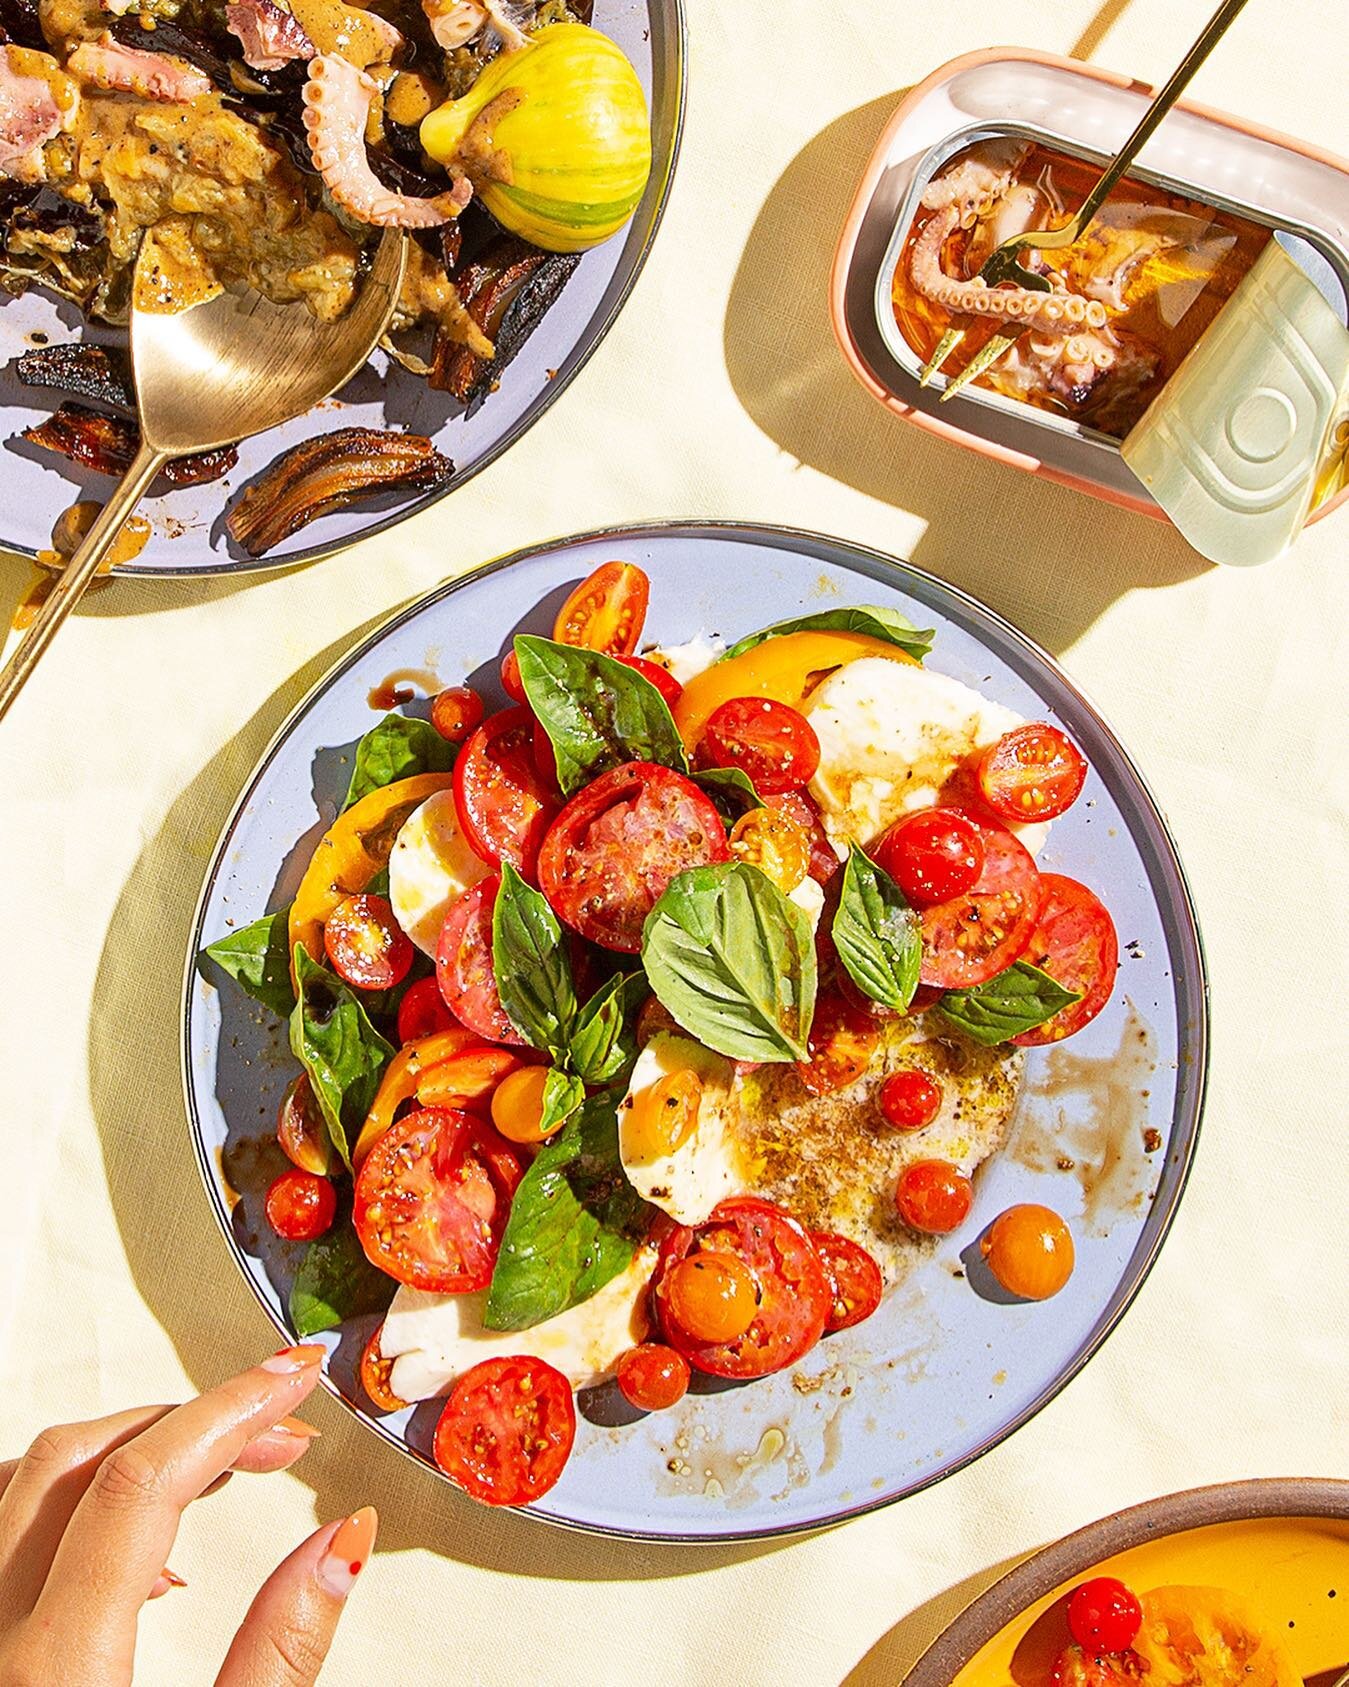 Another day another tomato. What&rsquo;s a girl to do? Simple caprese with a side of roasted eggplant, shallots, pickled figs and tinned octopus. 

#dinner #dinnerideas #tomatoseason #tomatoes #yummy #octopus #tinnedfish #tinnedseafood